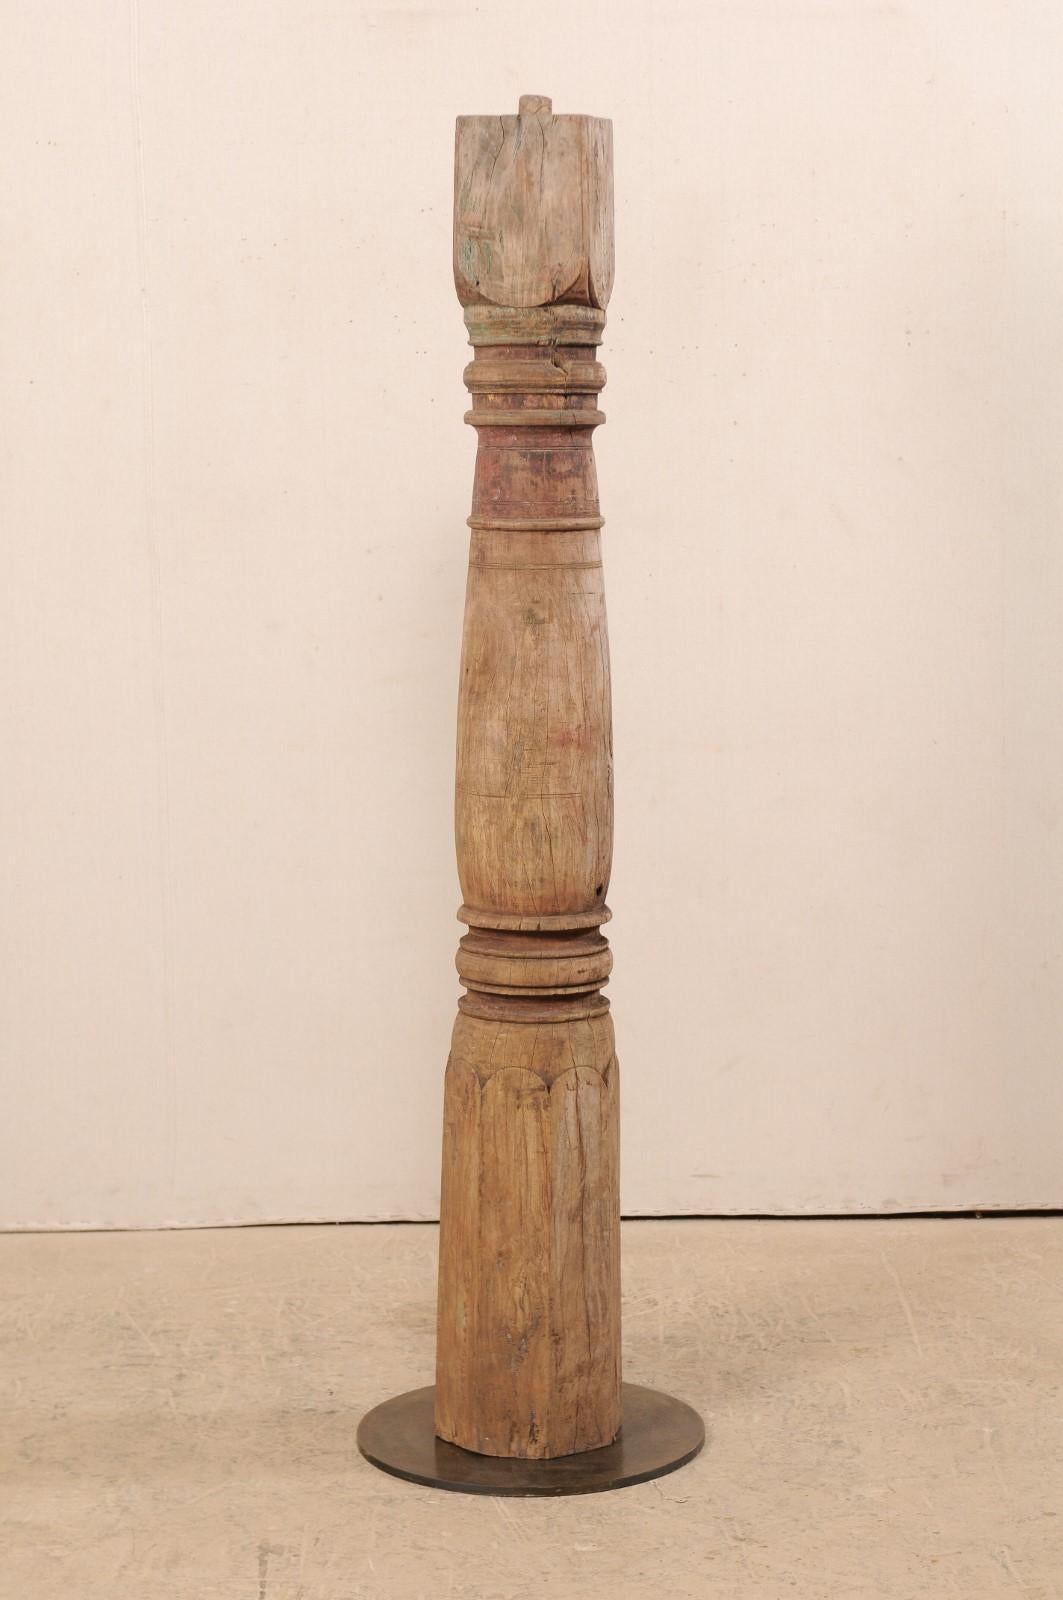 Carved 19th Century British Colonial Wood Column